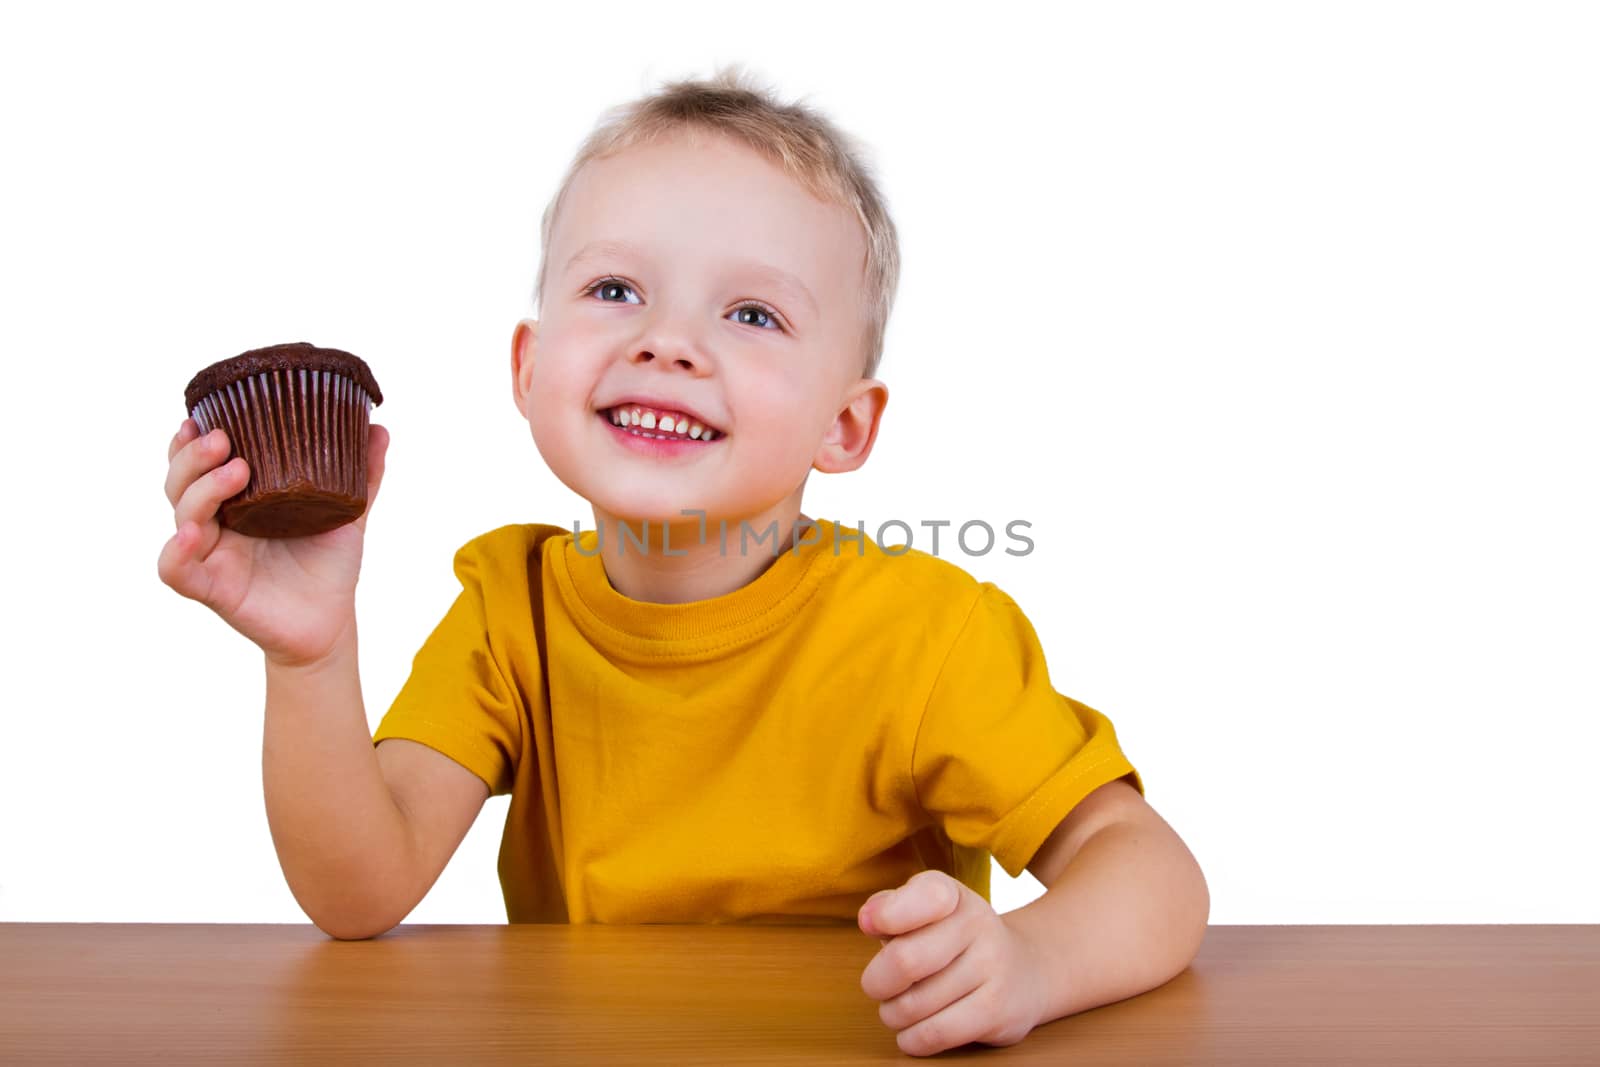 A small boy in yellow t-shirt eating a chocolate muffin. Isolated on white background